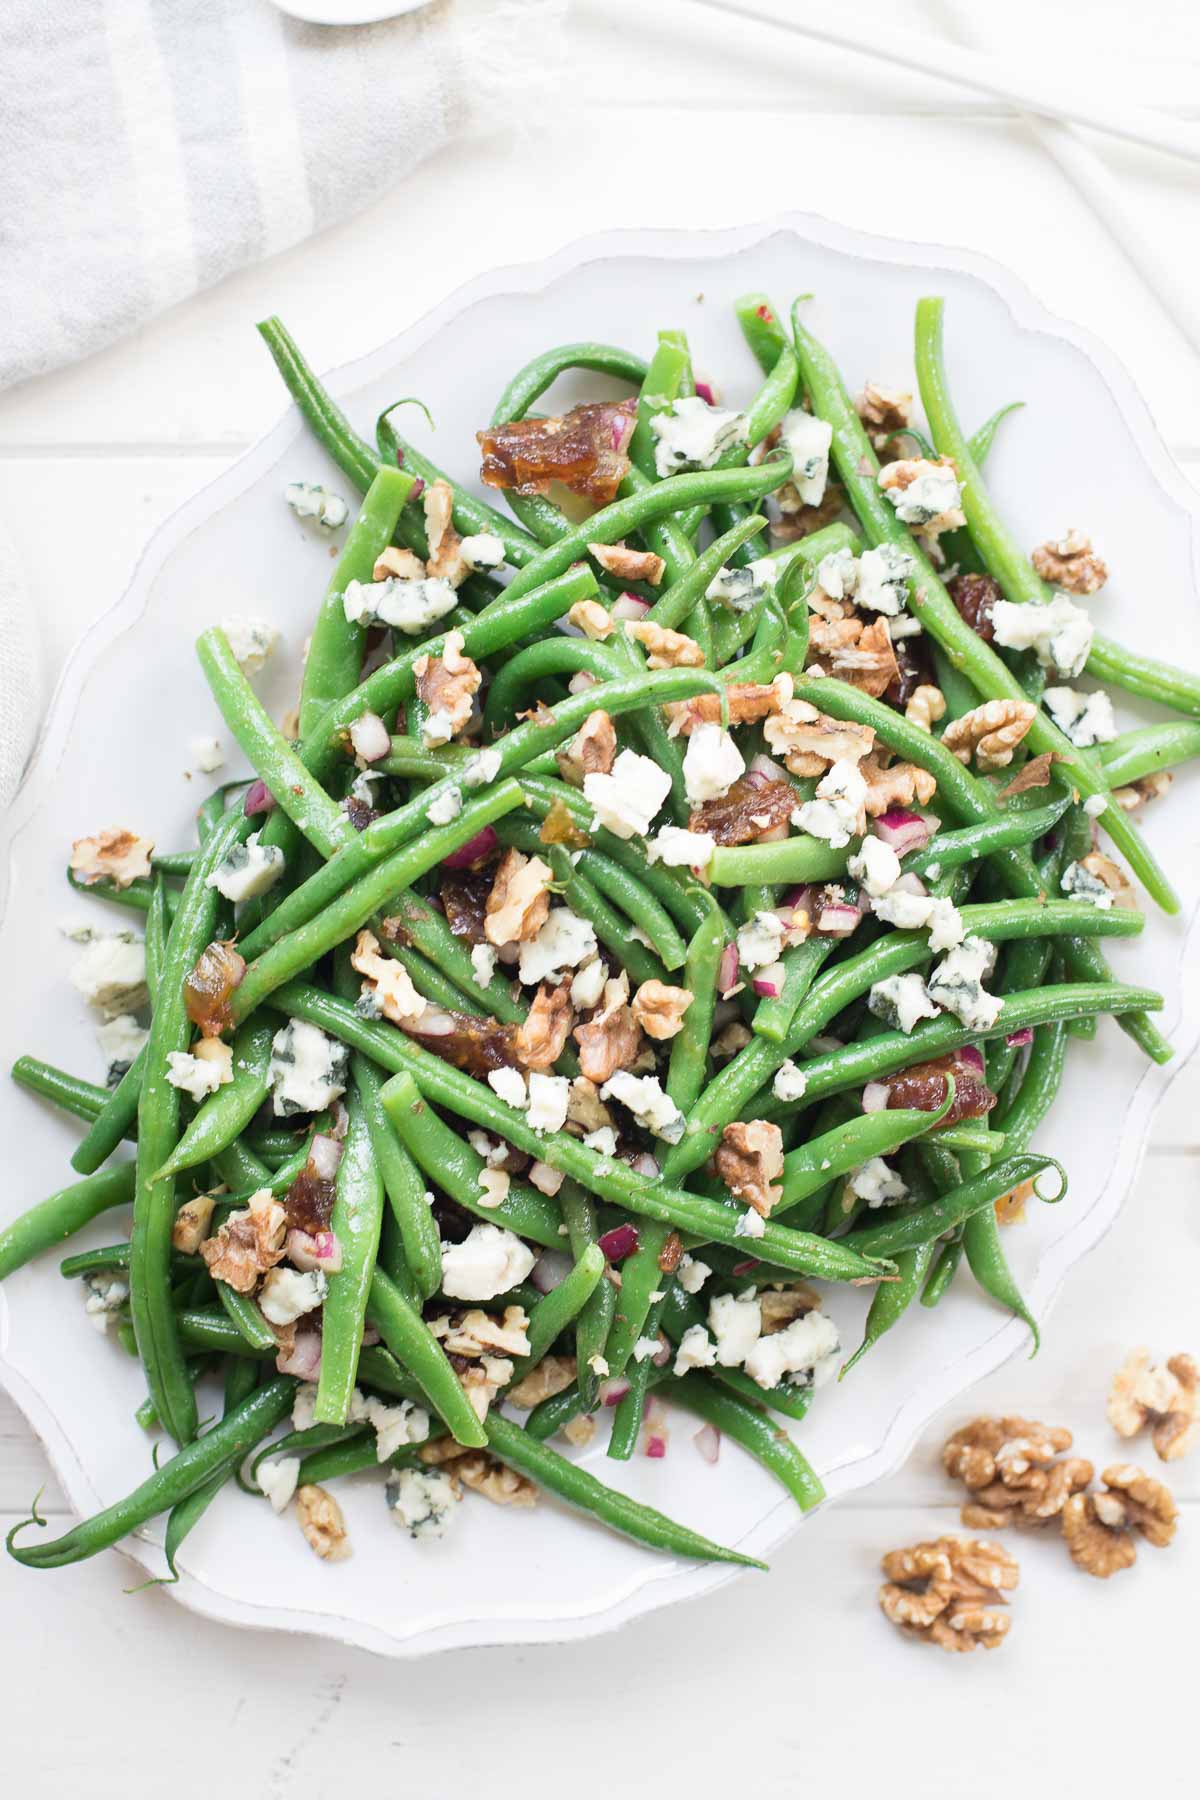 Green Bean Salad with Walnuts, Dates and Roquefort